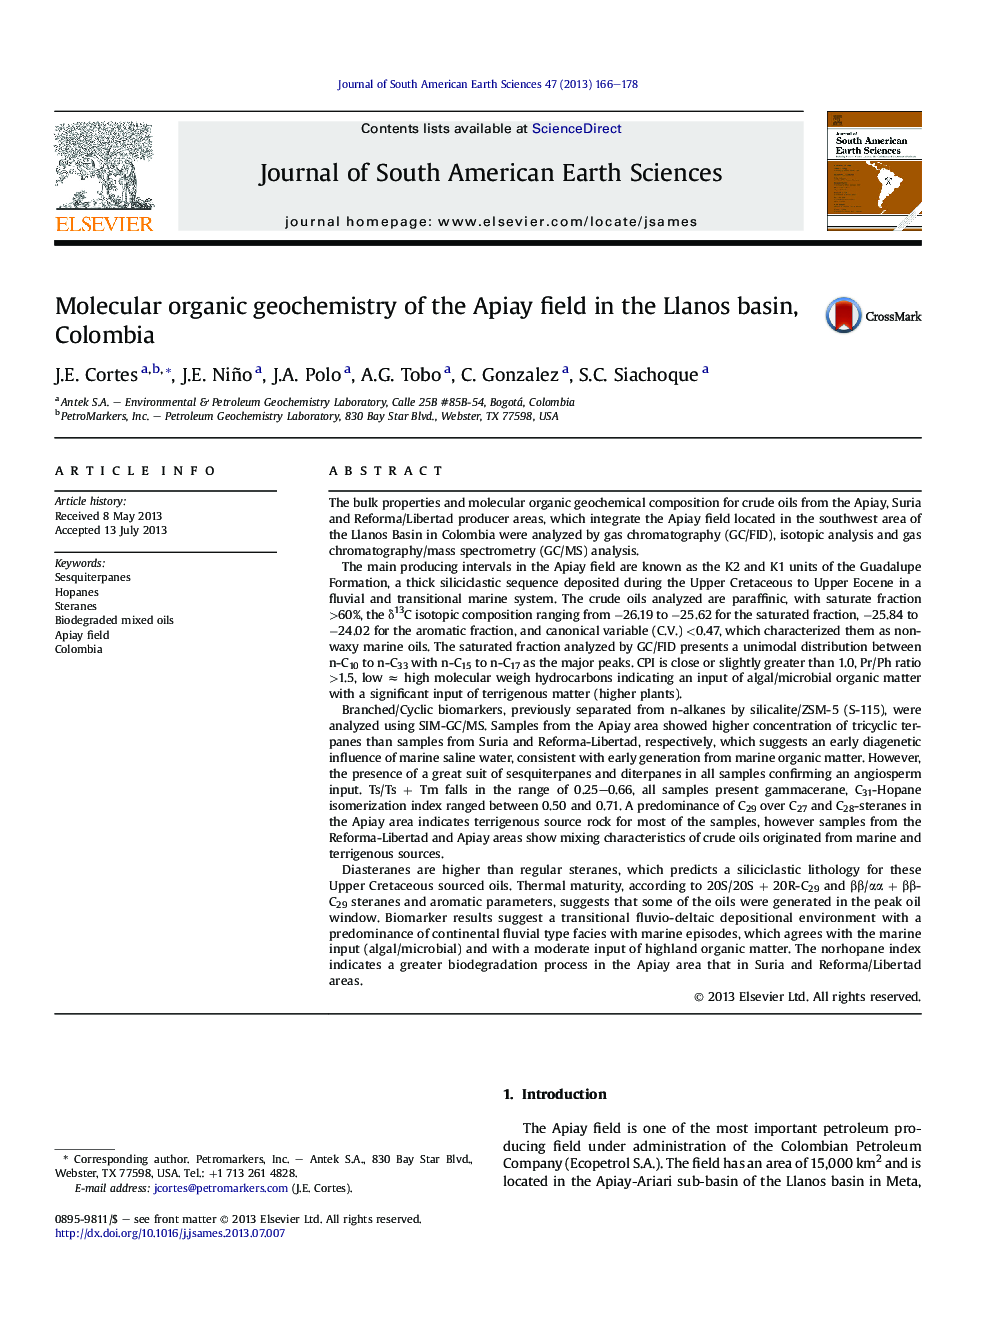 Molecular organic geochemistry of the Apiay field in the Llanos basin, Colombia